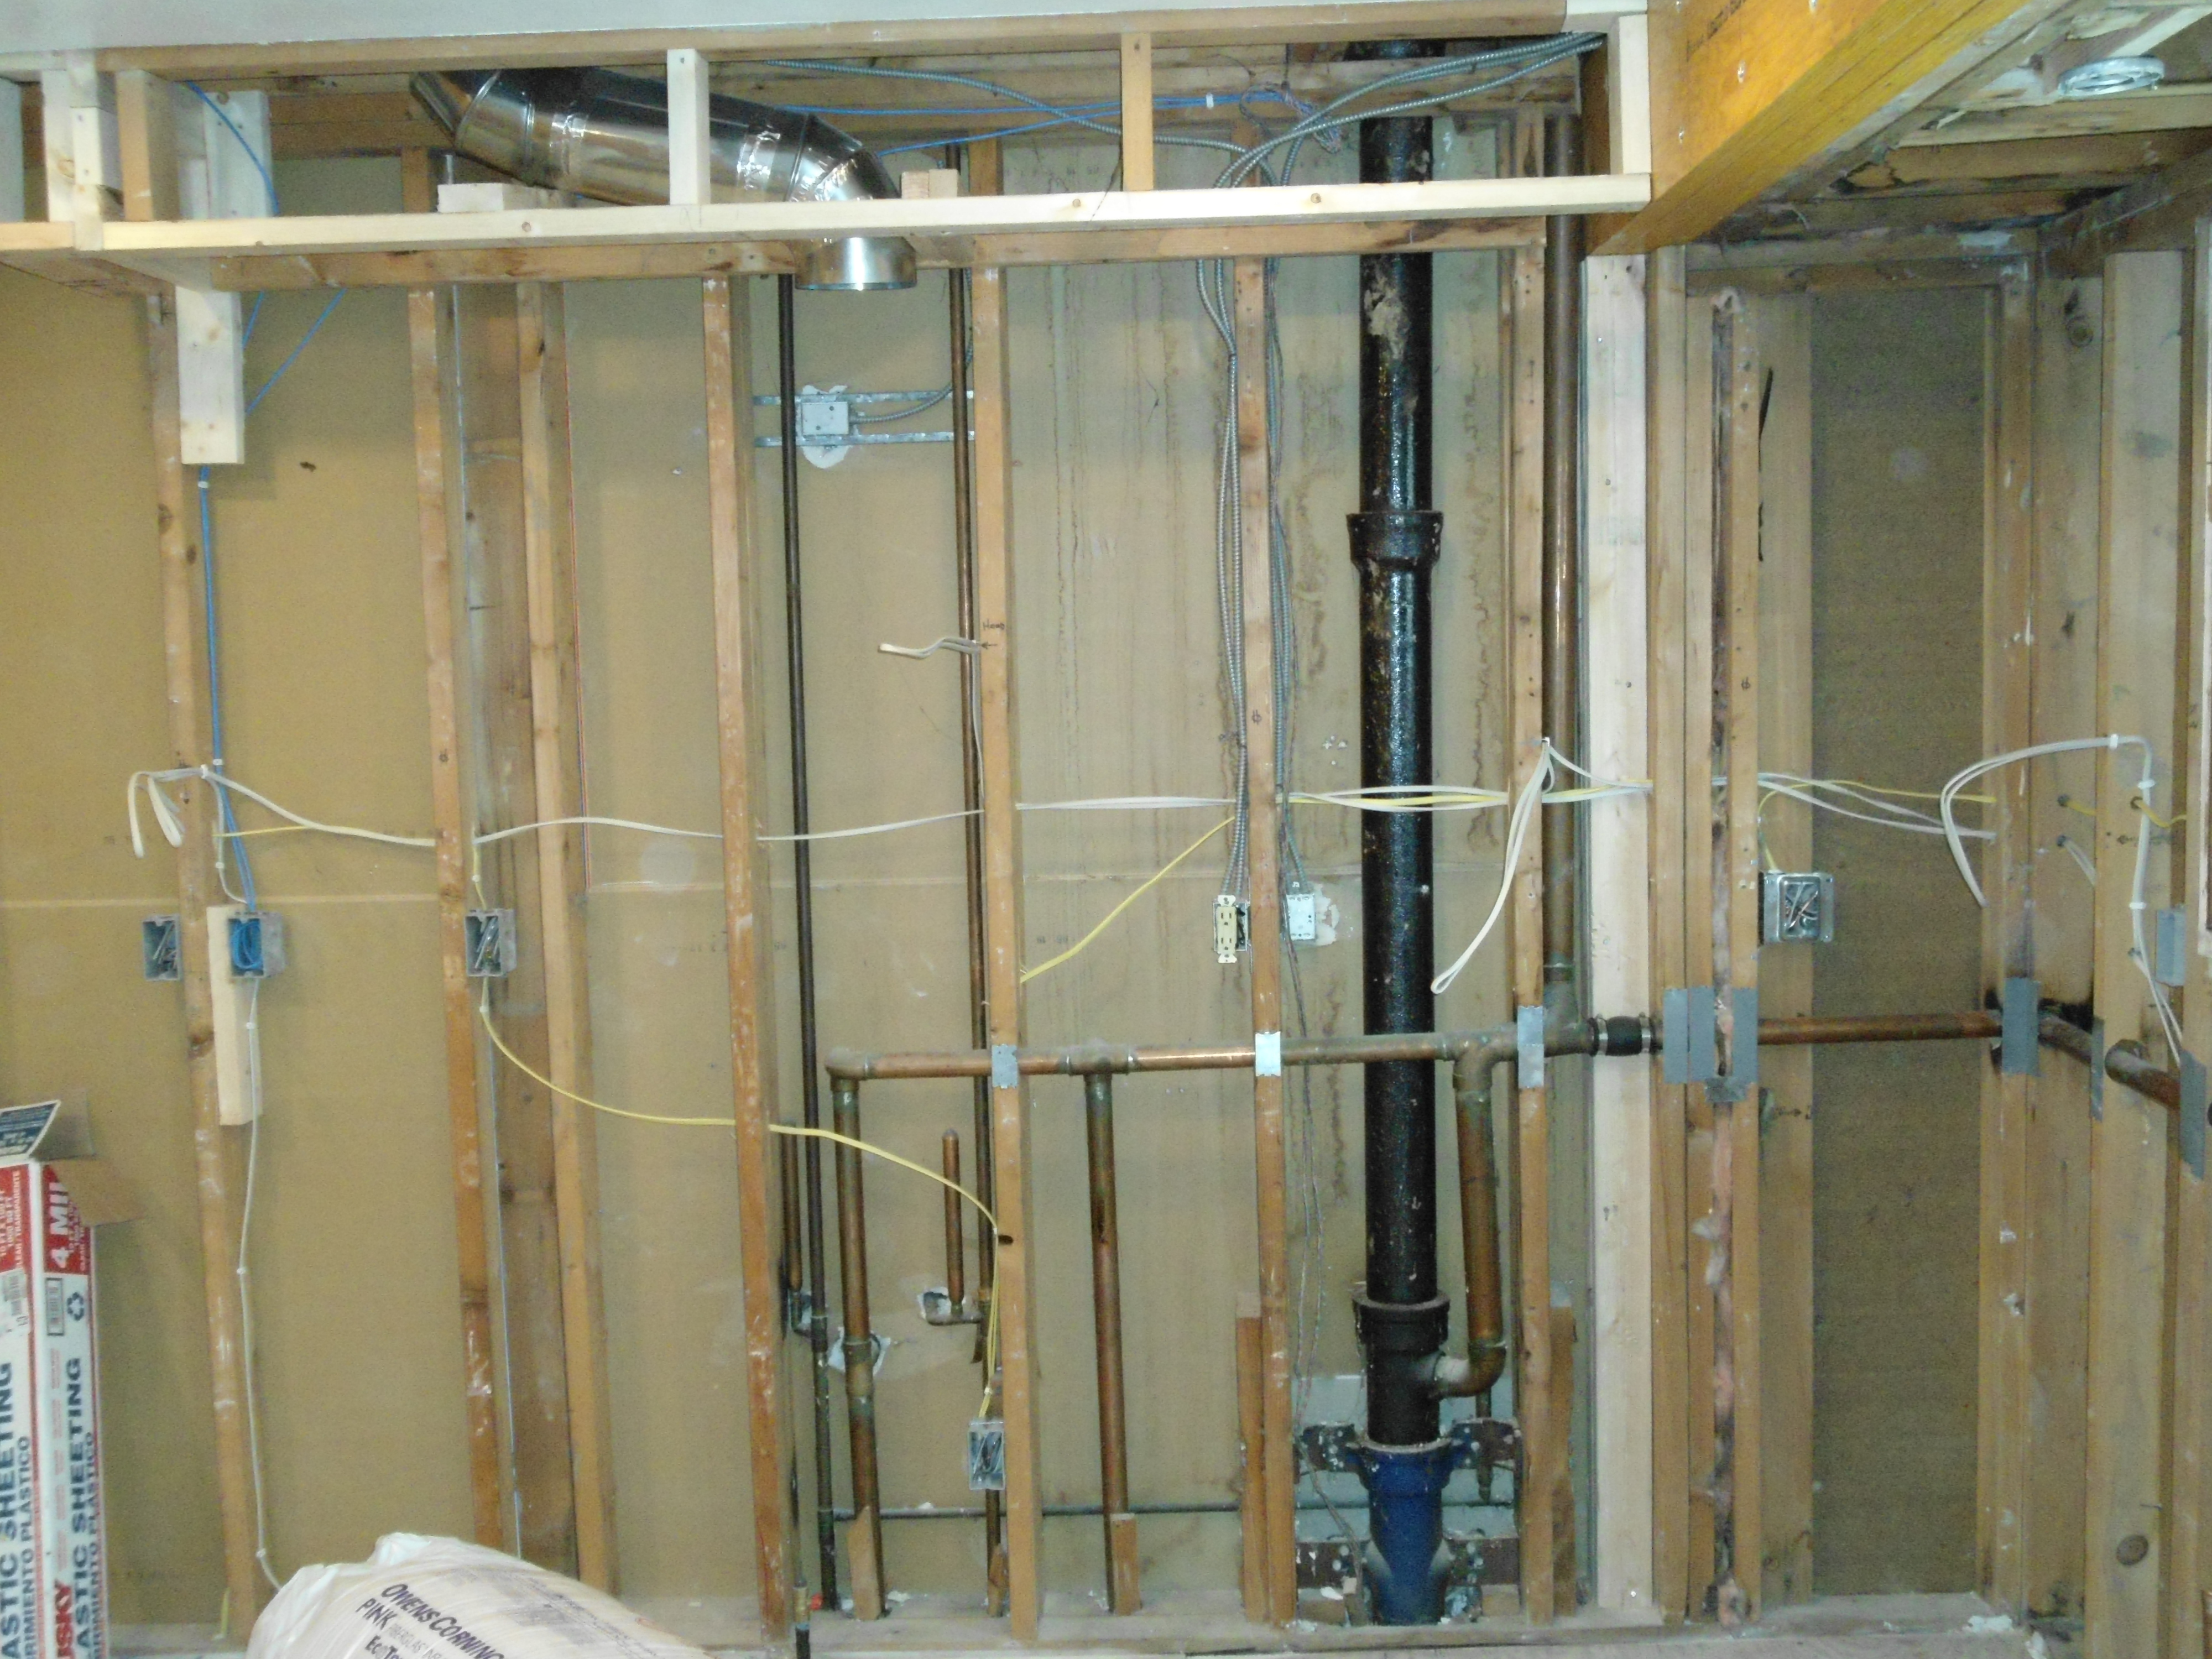 Rough Electric Rough Plumbing And Drywall Remodeling In Real Time